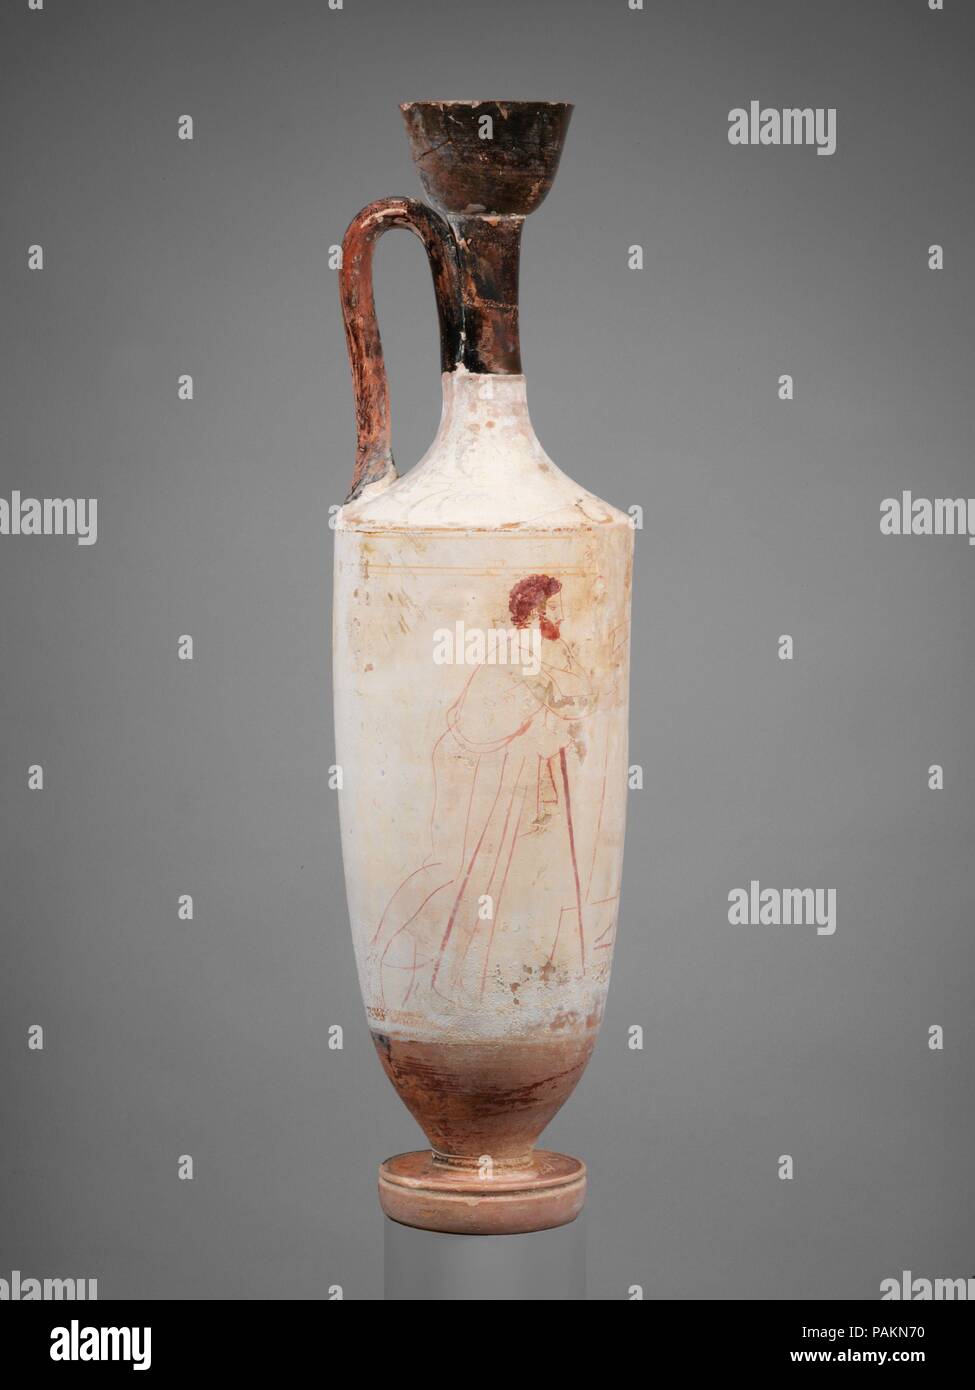 Terracotta lekythos (oil flask). Culture: Greek, Attic. Dimensions: H.: 17 3/4 in. (45.1 cm). Date: ca. 420-400 B.C..  Youth seated at a tomb with bearded, draped man. Museum: Metropolitan Museum of Art, New York, USA. Stock Photo